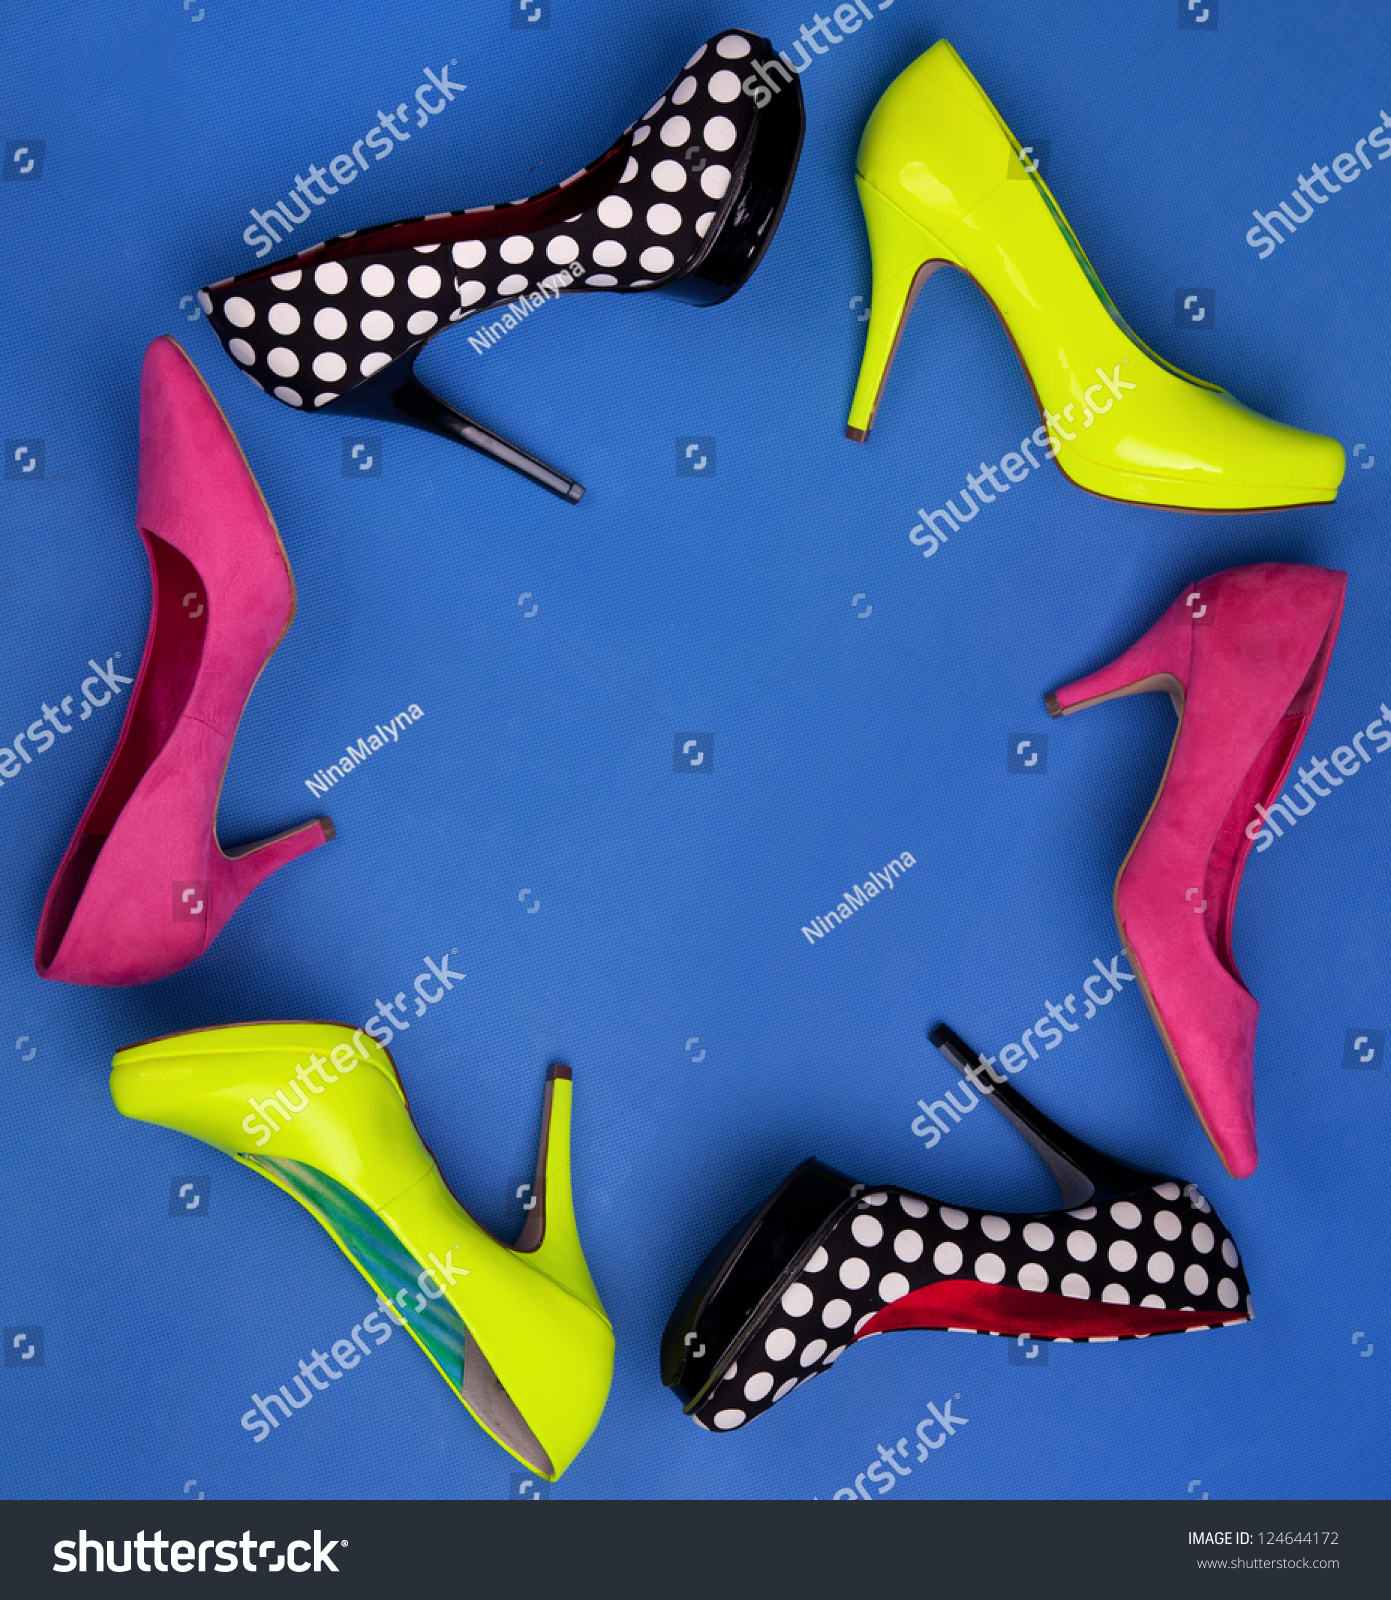 Colorful High Heels Frame Stock Photo 124644172 : Shutterstock